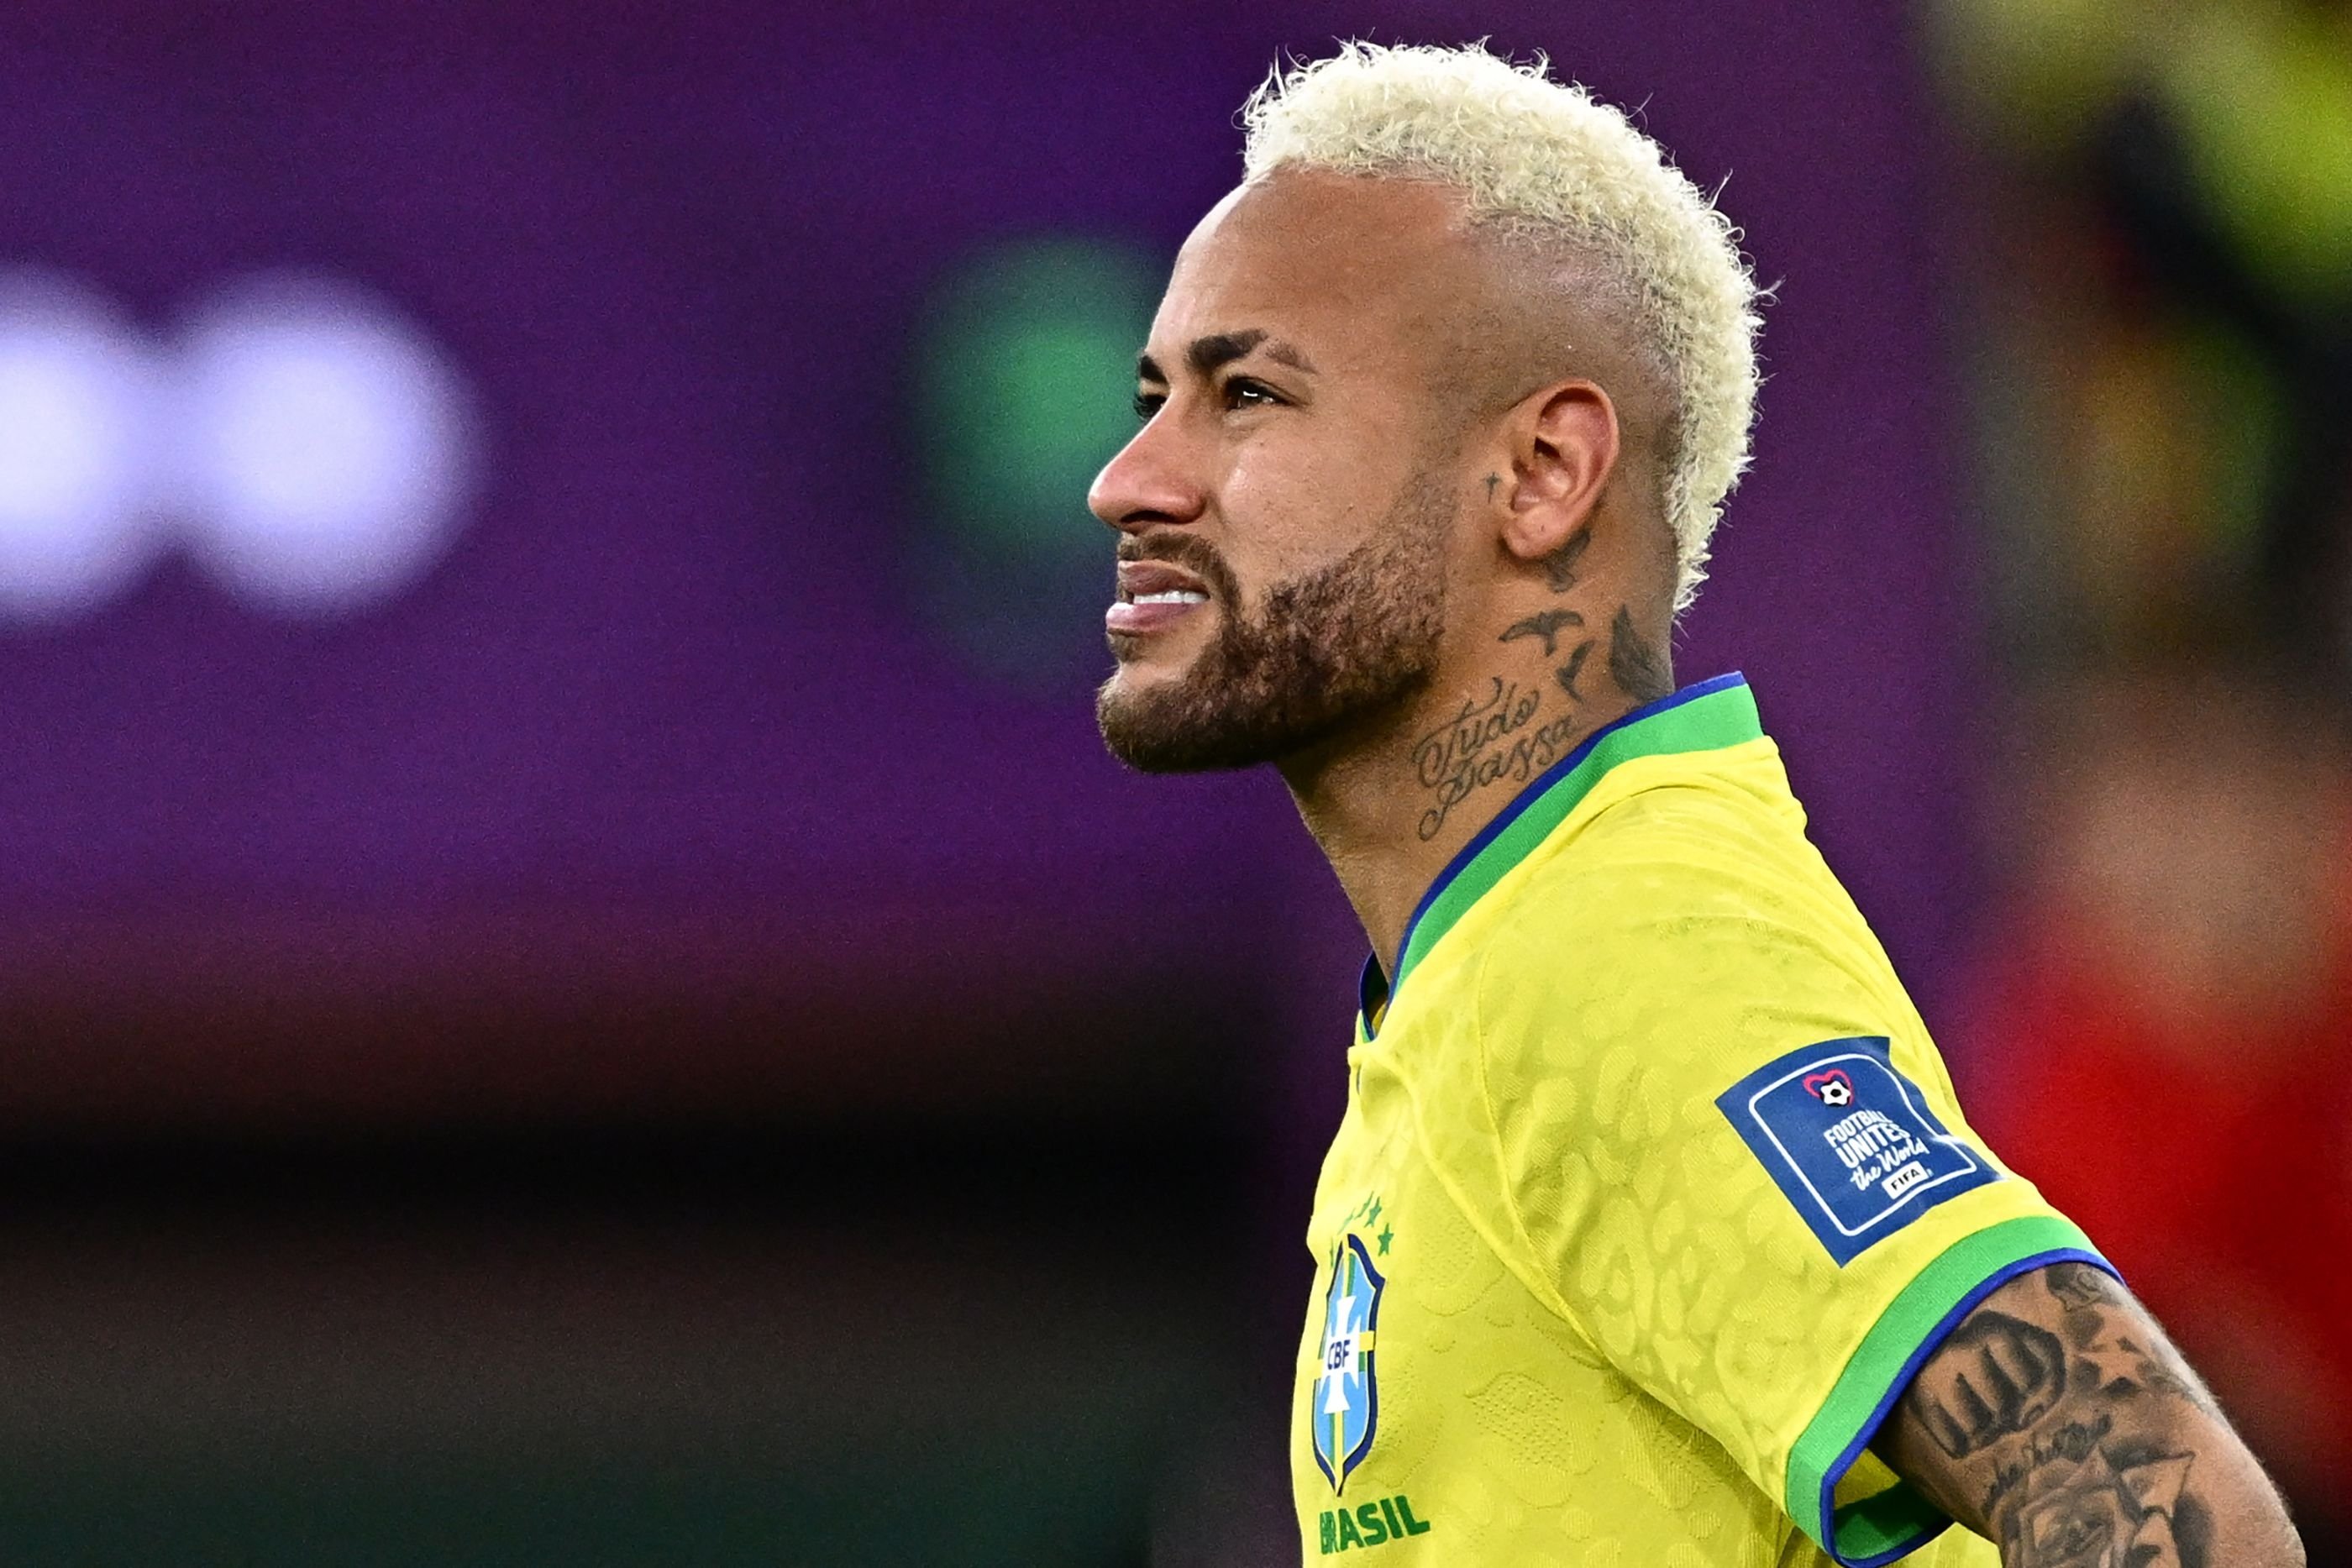 Neymar reveals surprising new hairstyle as he recovers from ACL injury